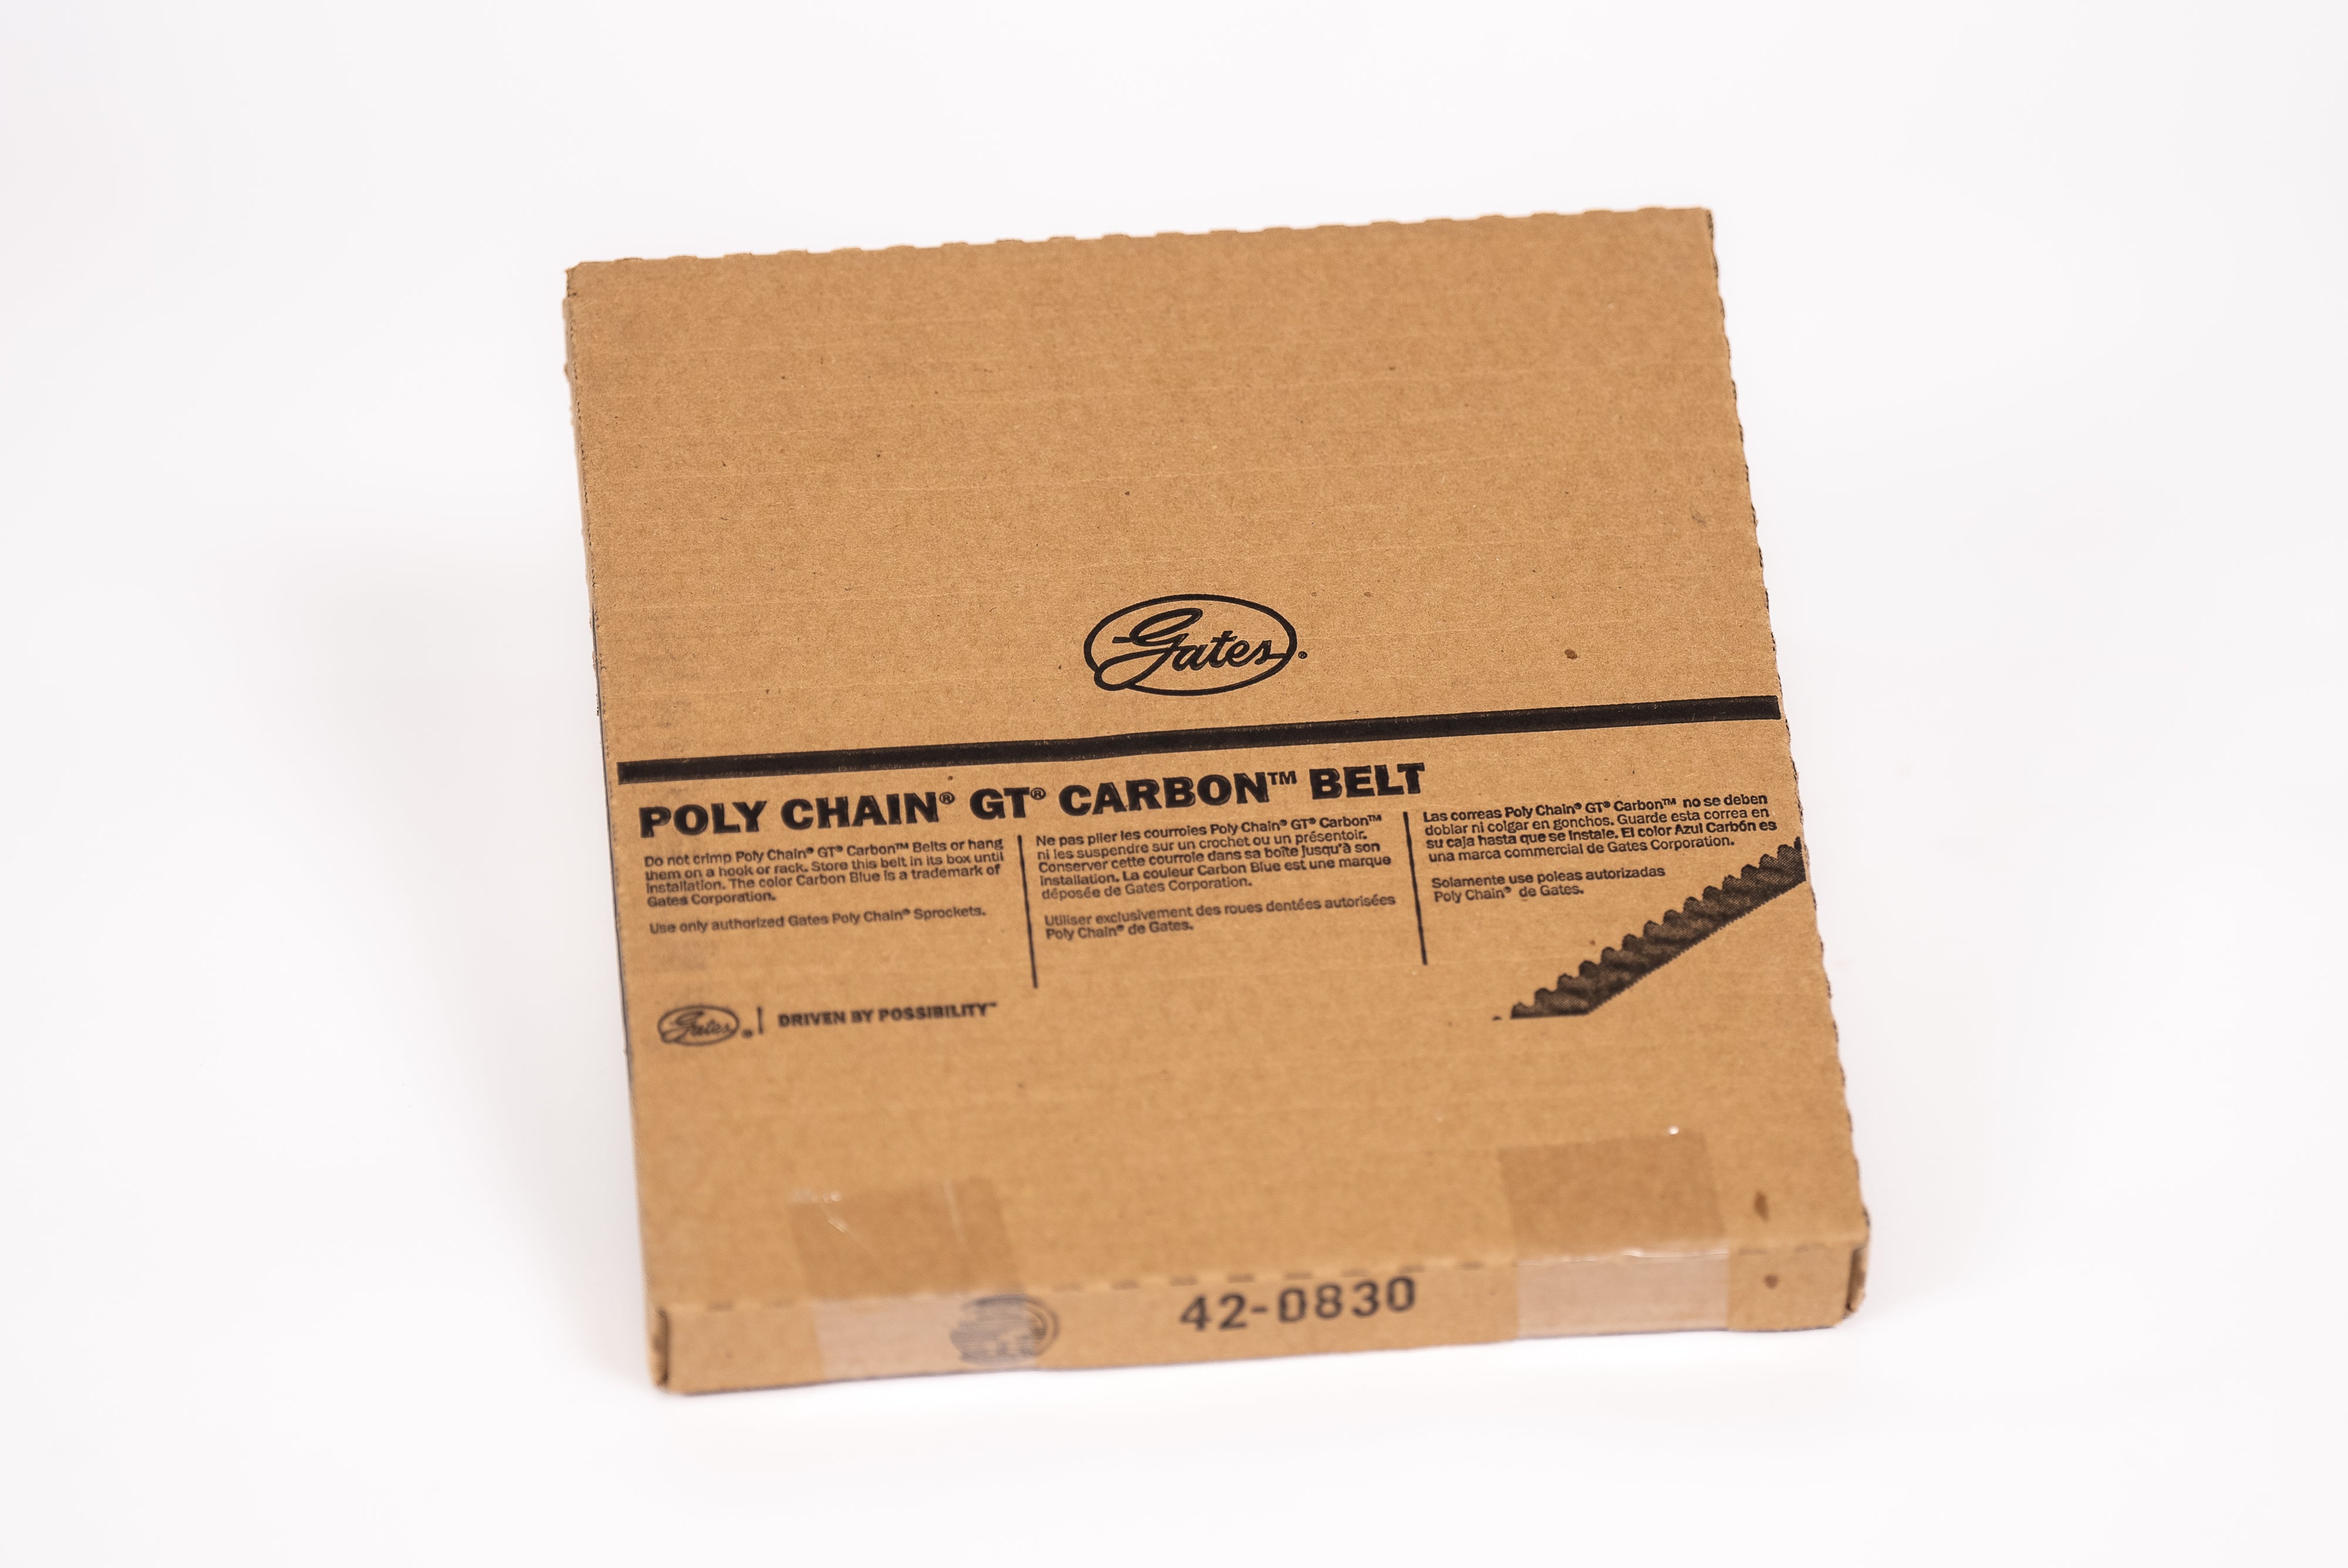 Poly Chain GT Carbon Belts, 8MGT-640-12